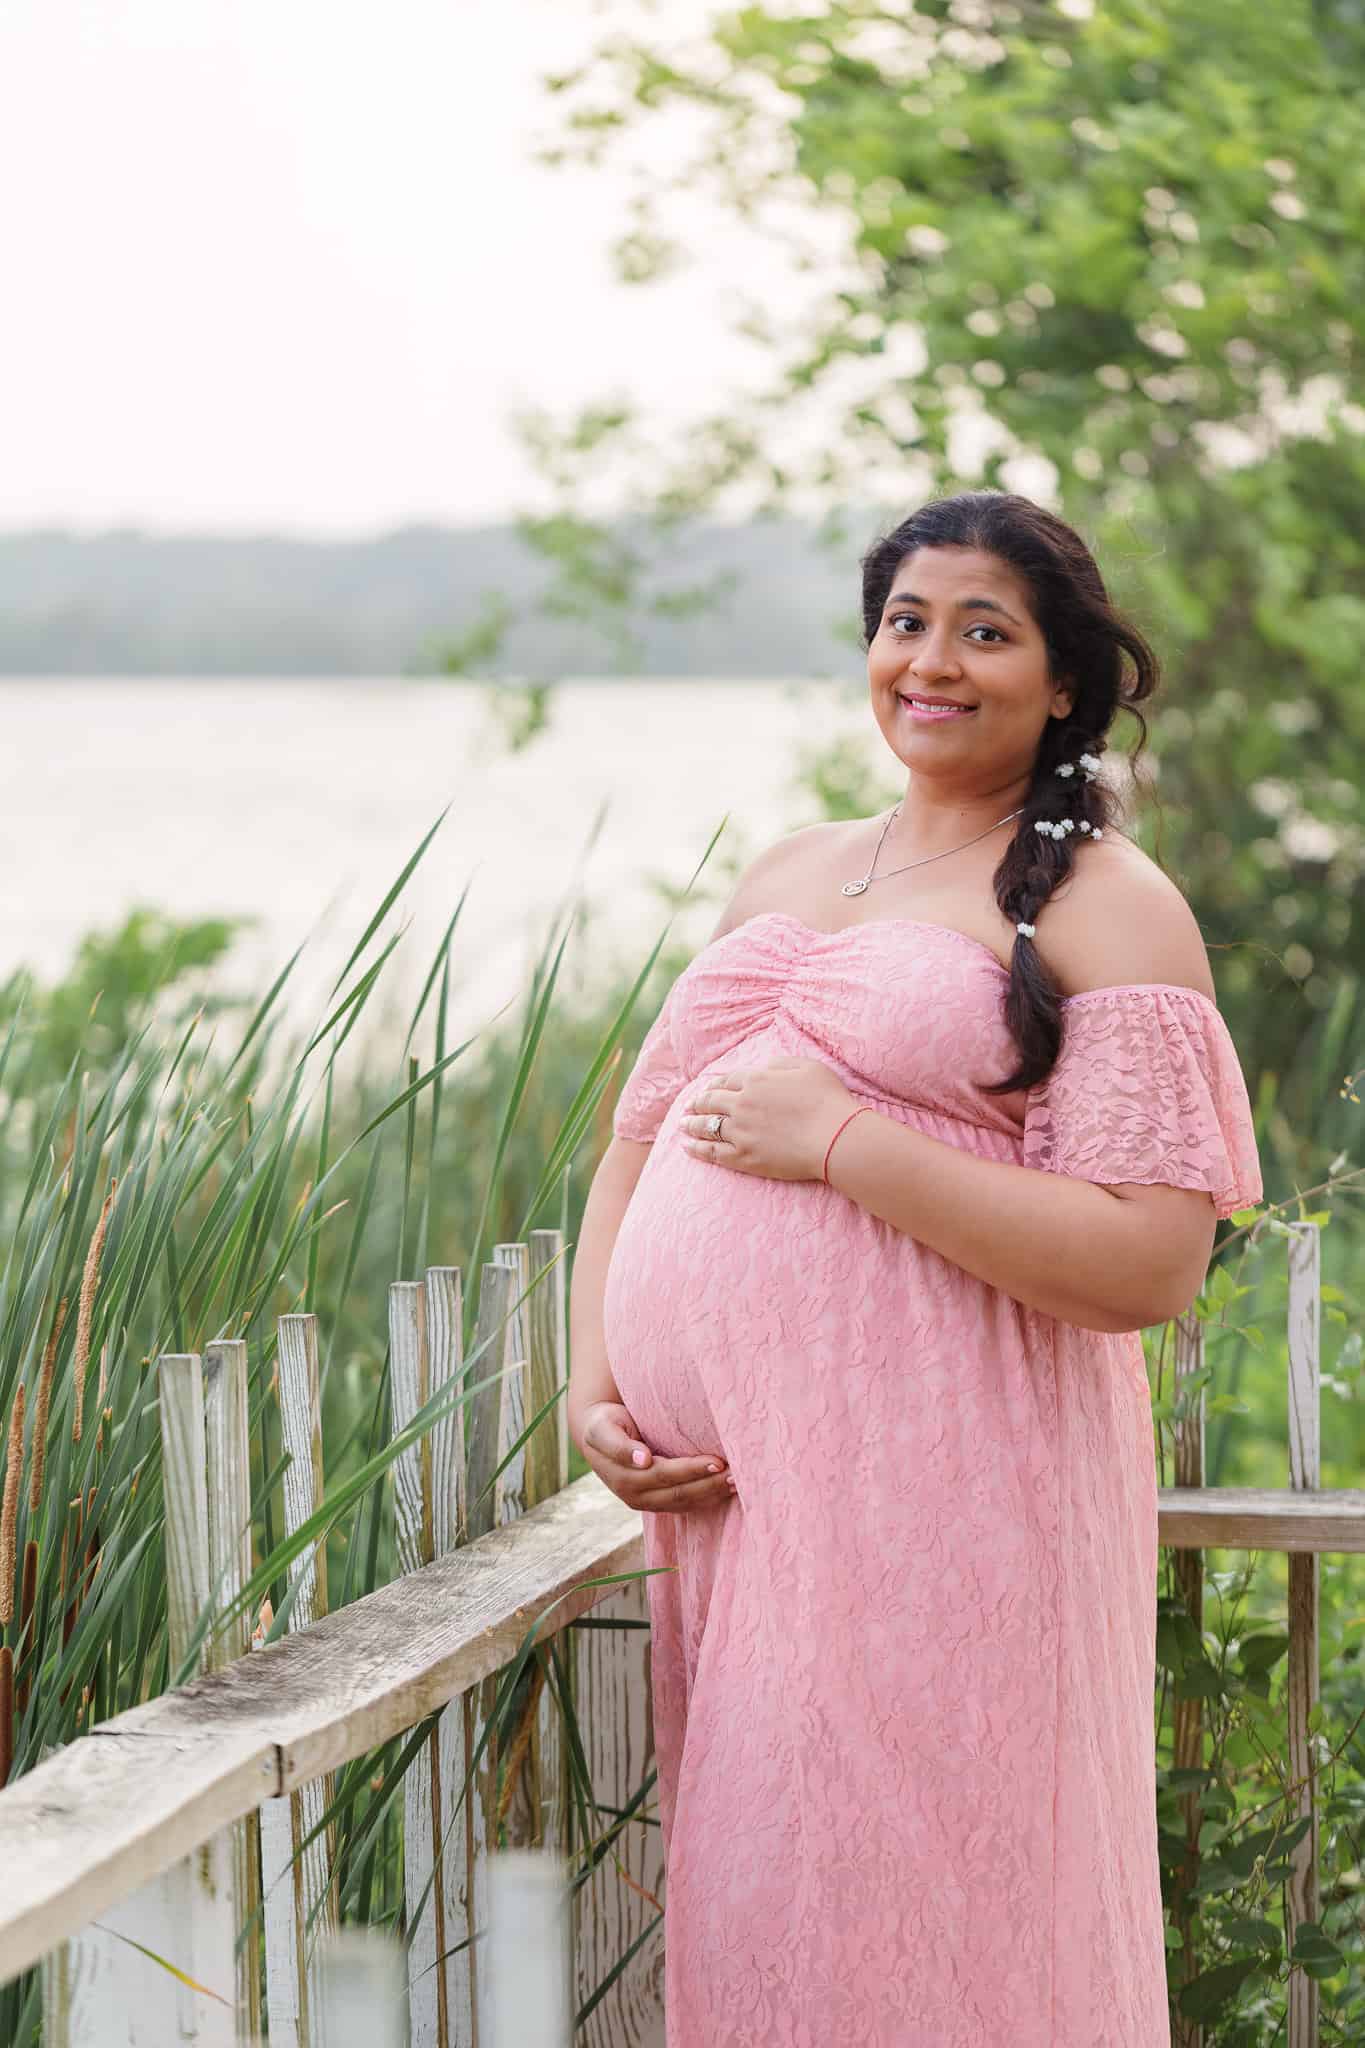 A pregnant mom in a pink dress posing among the reeds along the Potomac River.